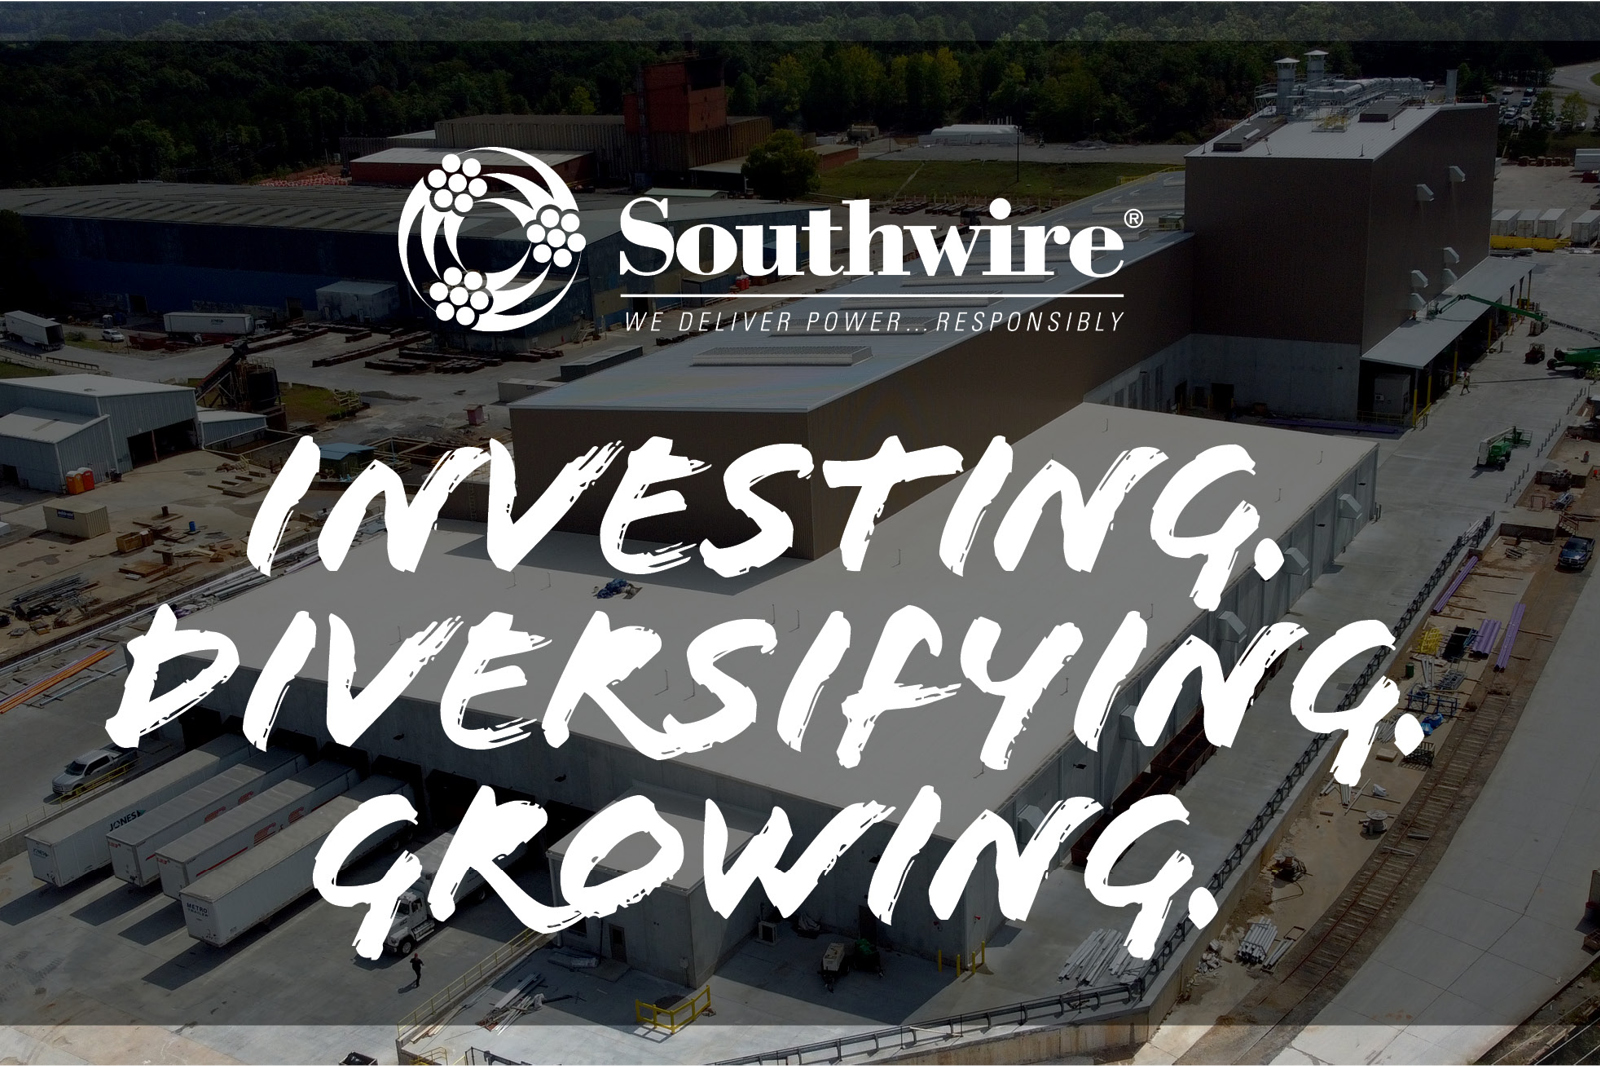 Southwire Investing Diversifying and Growing